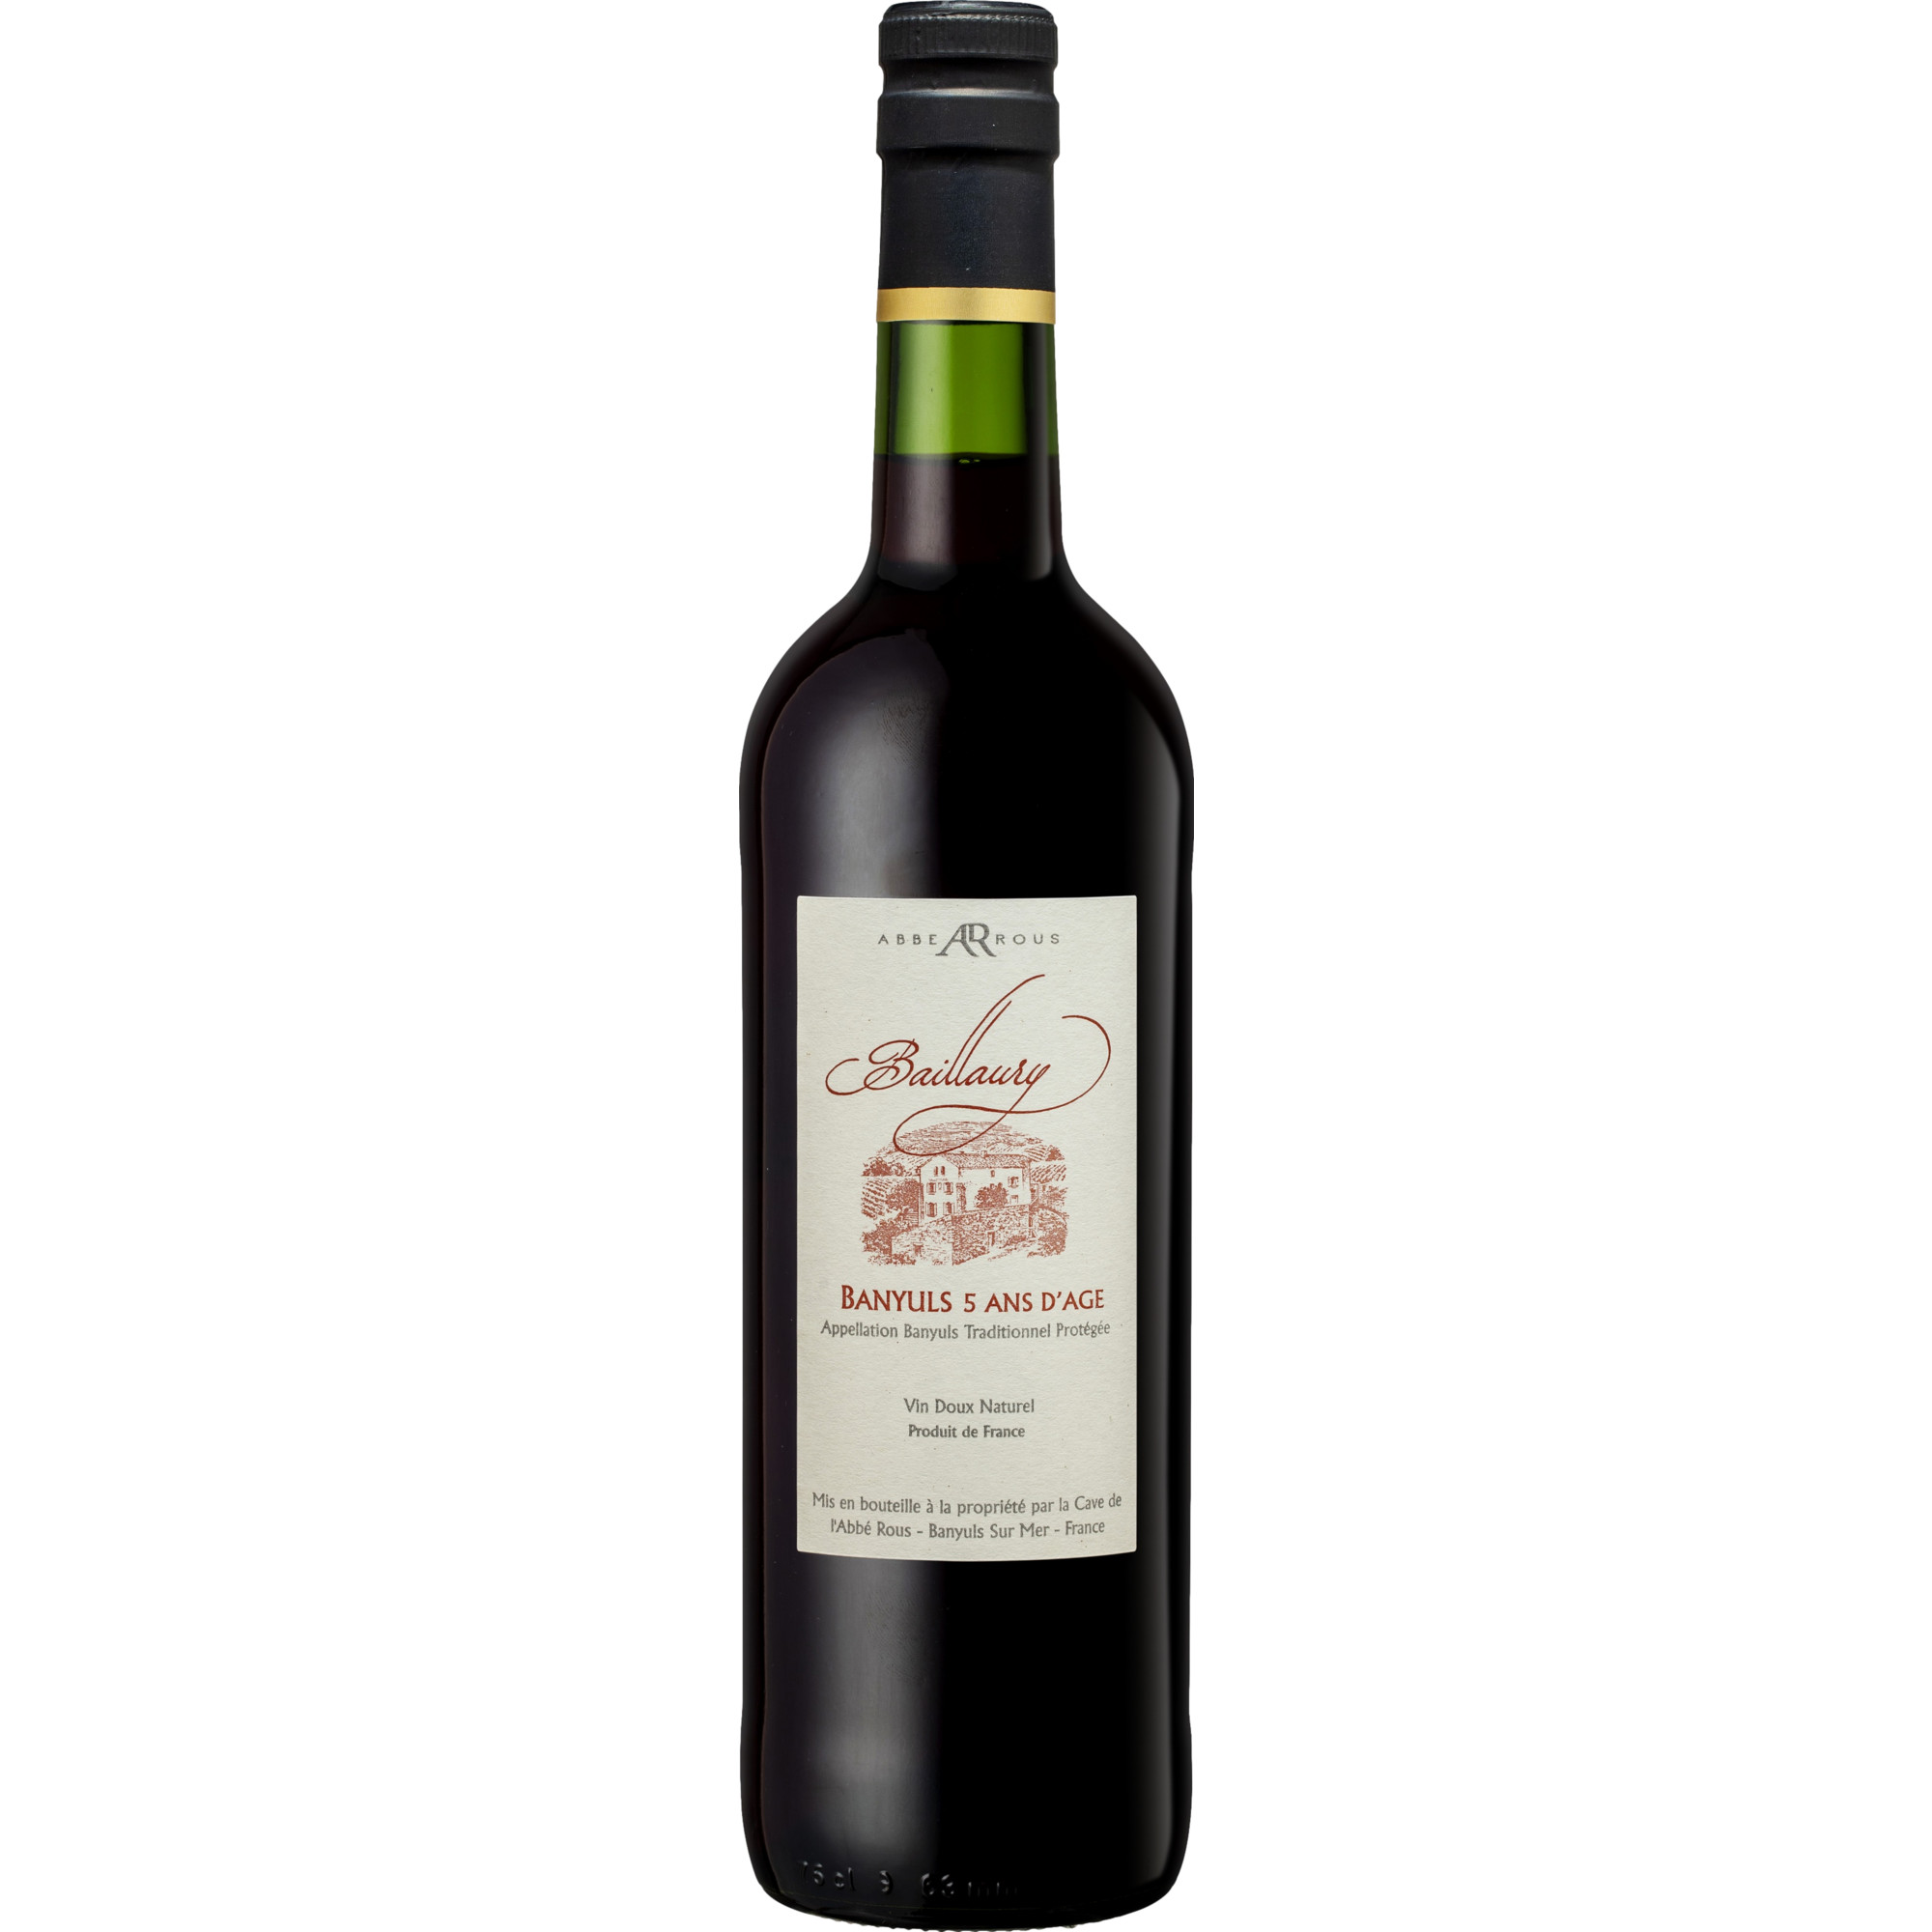 Image of Abbé Rous Baillaury 5 ans d`age, Banyuls AOP, Languedoc-Roussillon, Rotwein